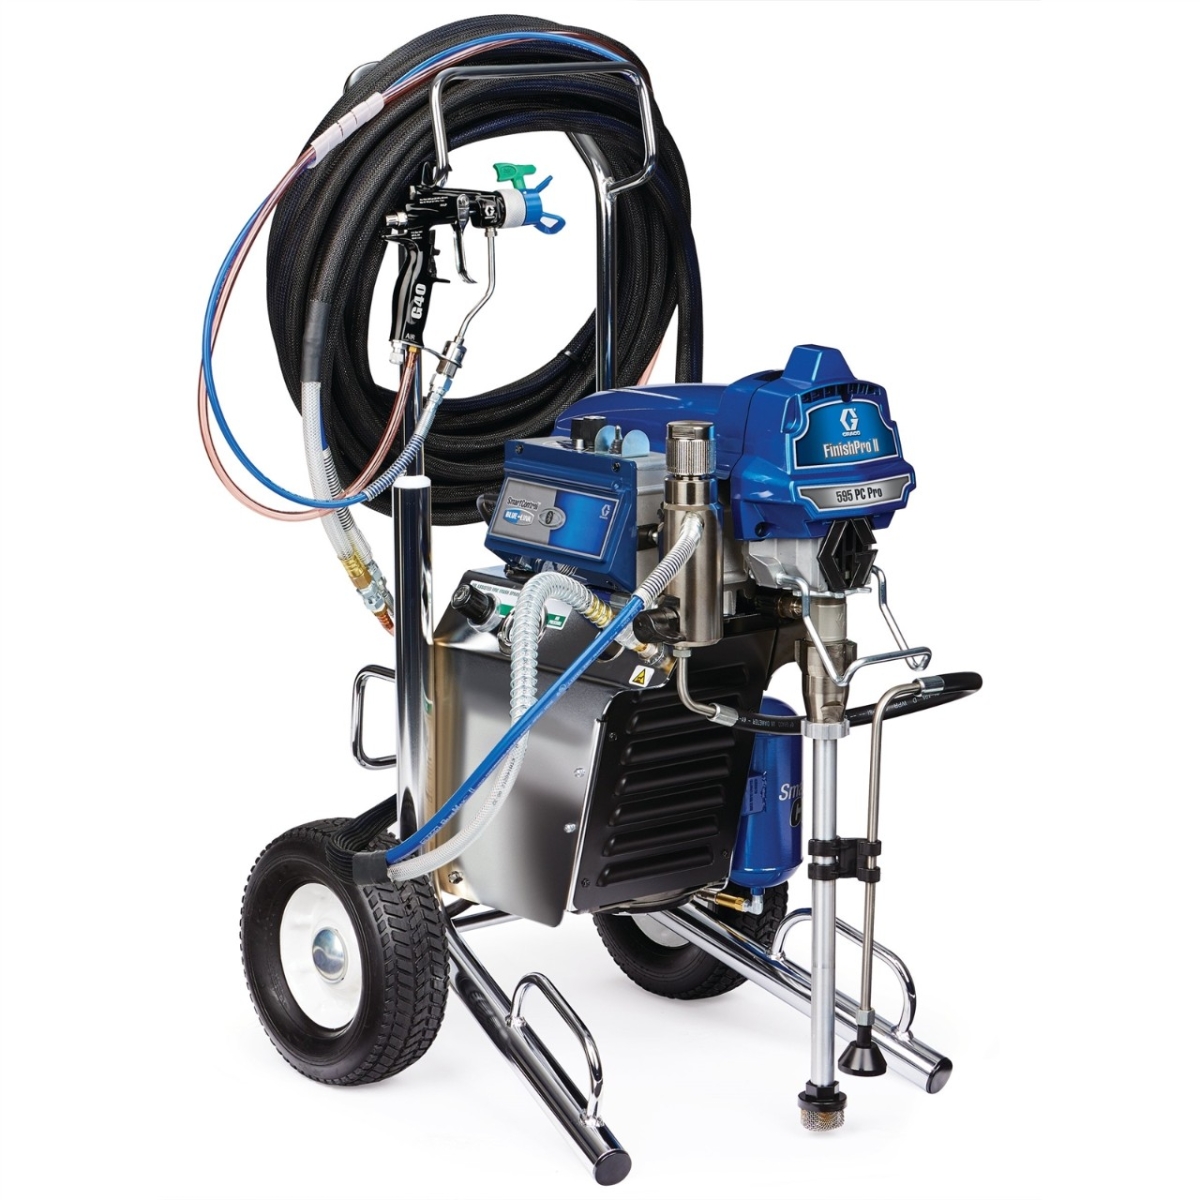 Graco FinishPro 2 595 Air-Assisted Airless Sprayer Unit